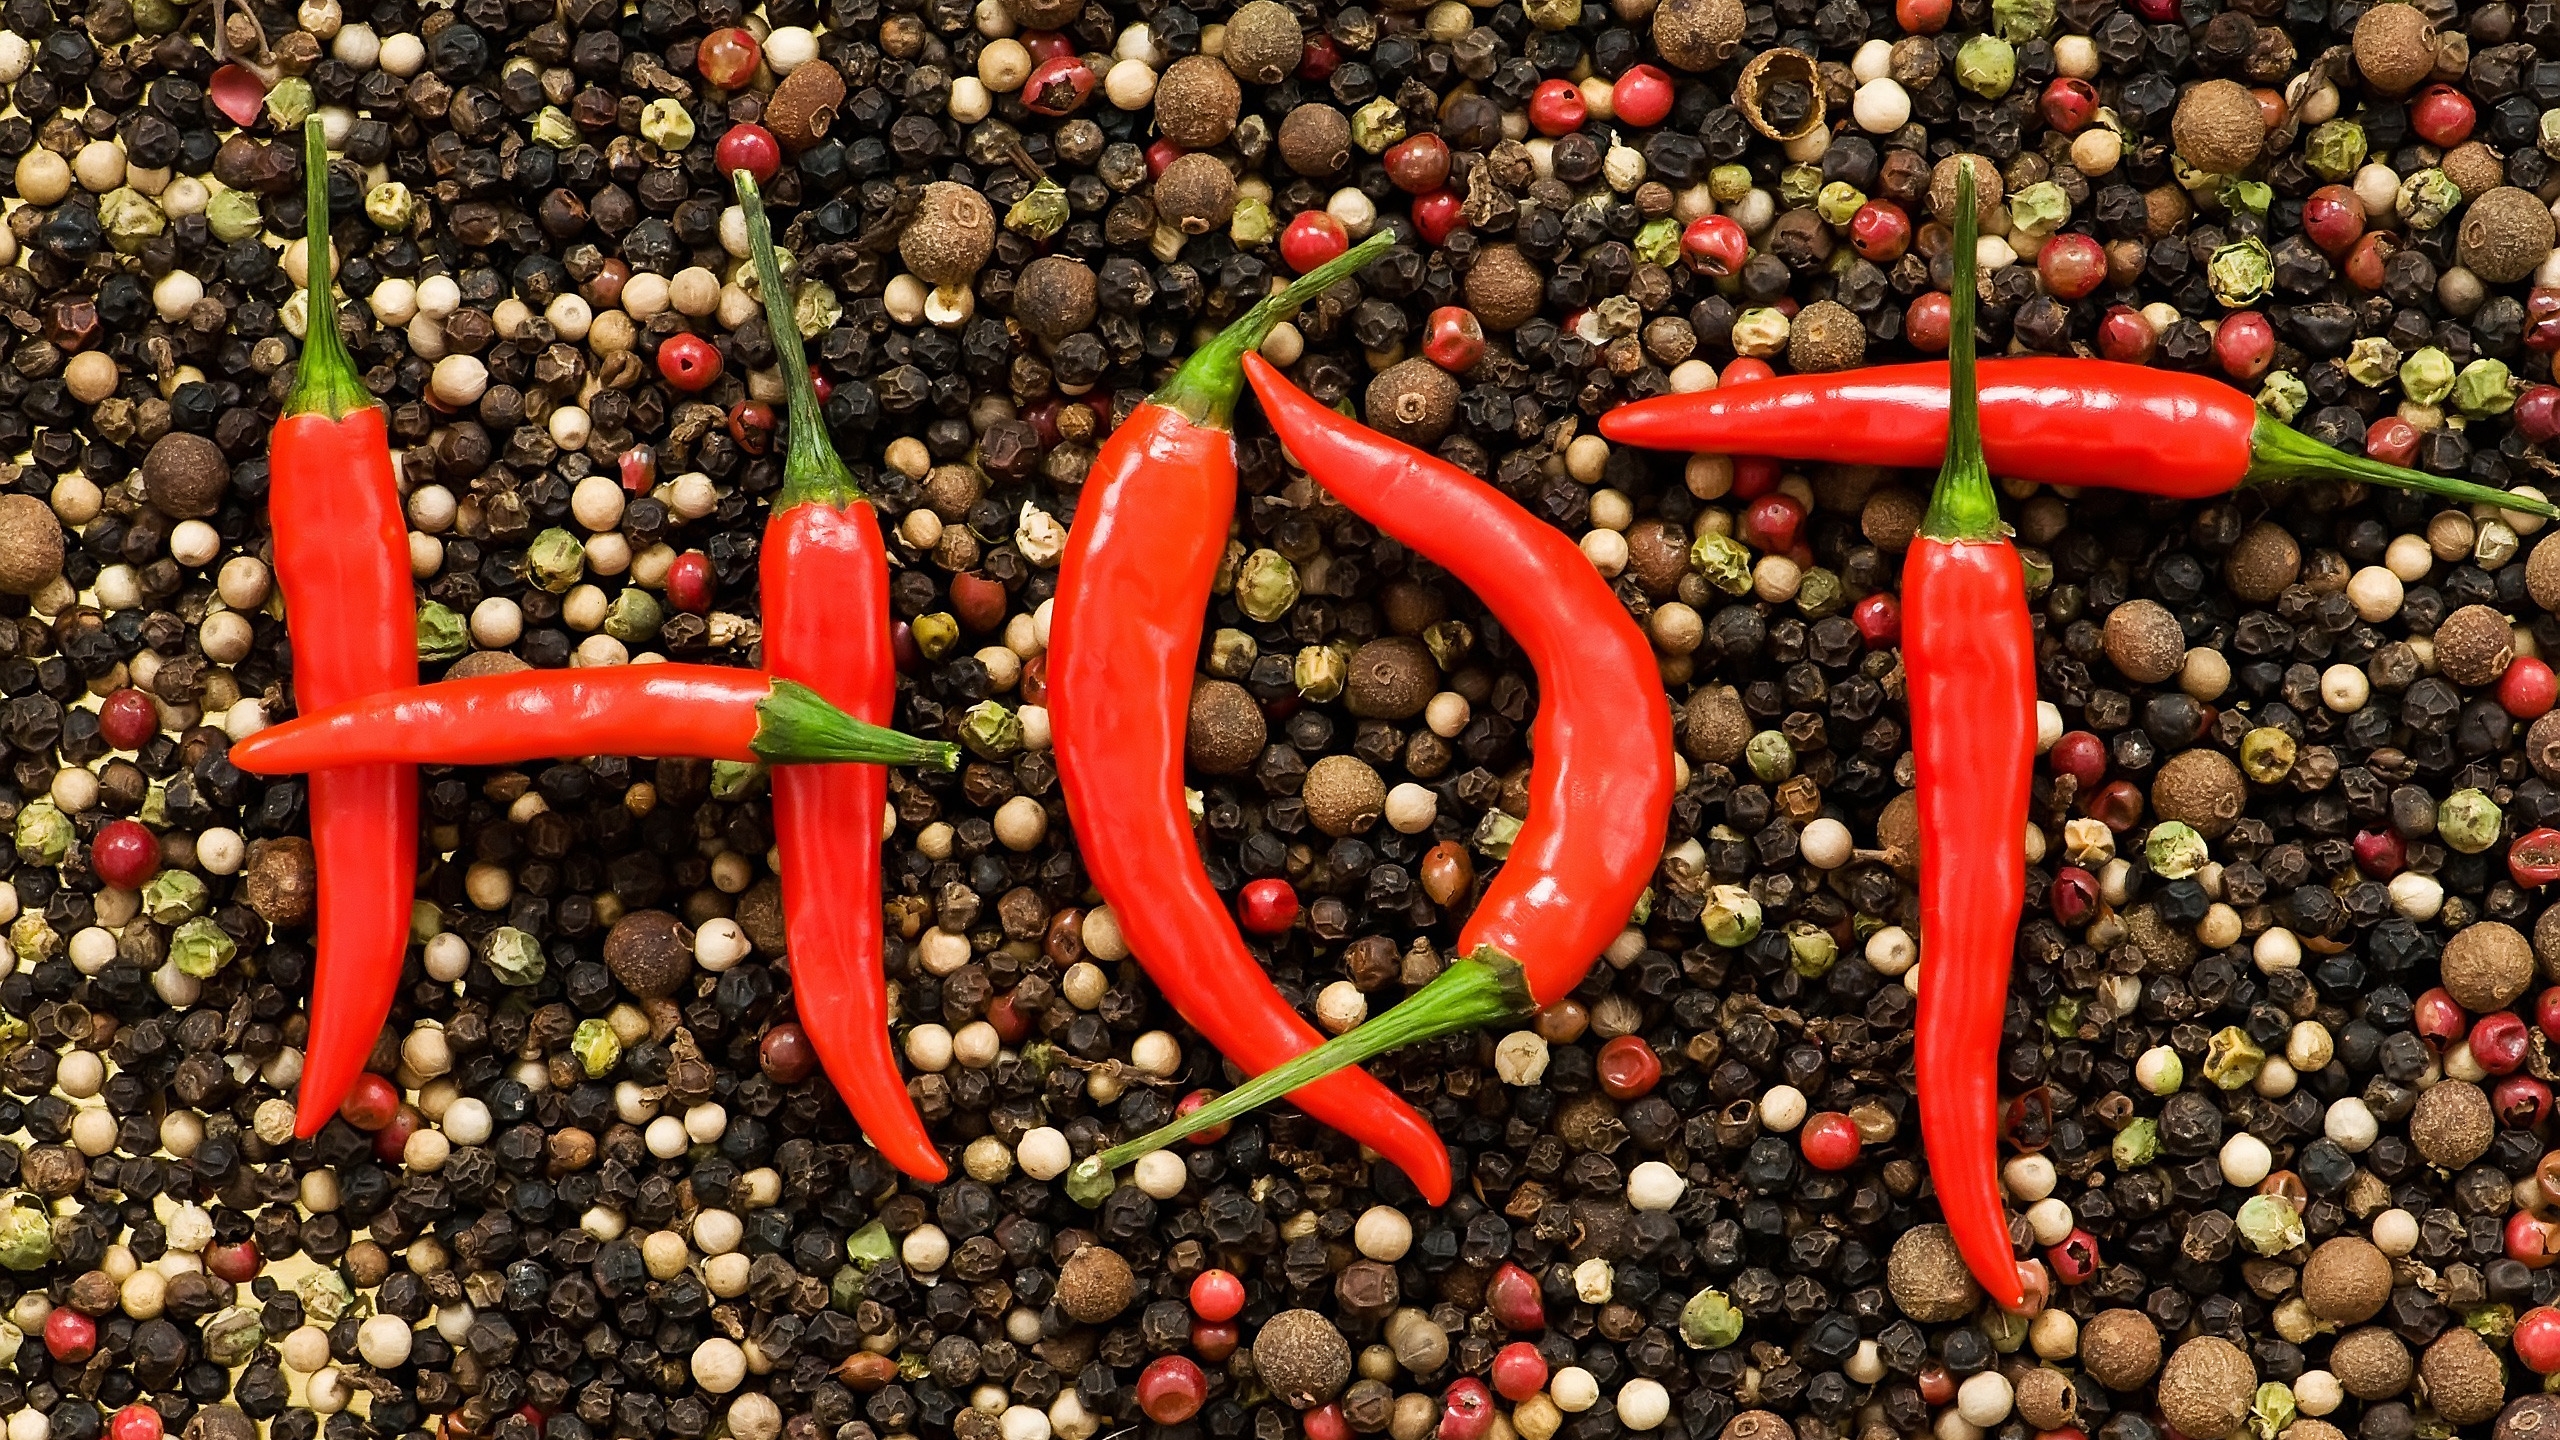 Hot Chilli and Pepper for 2560x1440 HDTV resolution